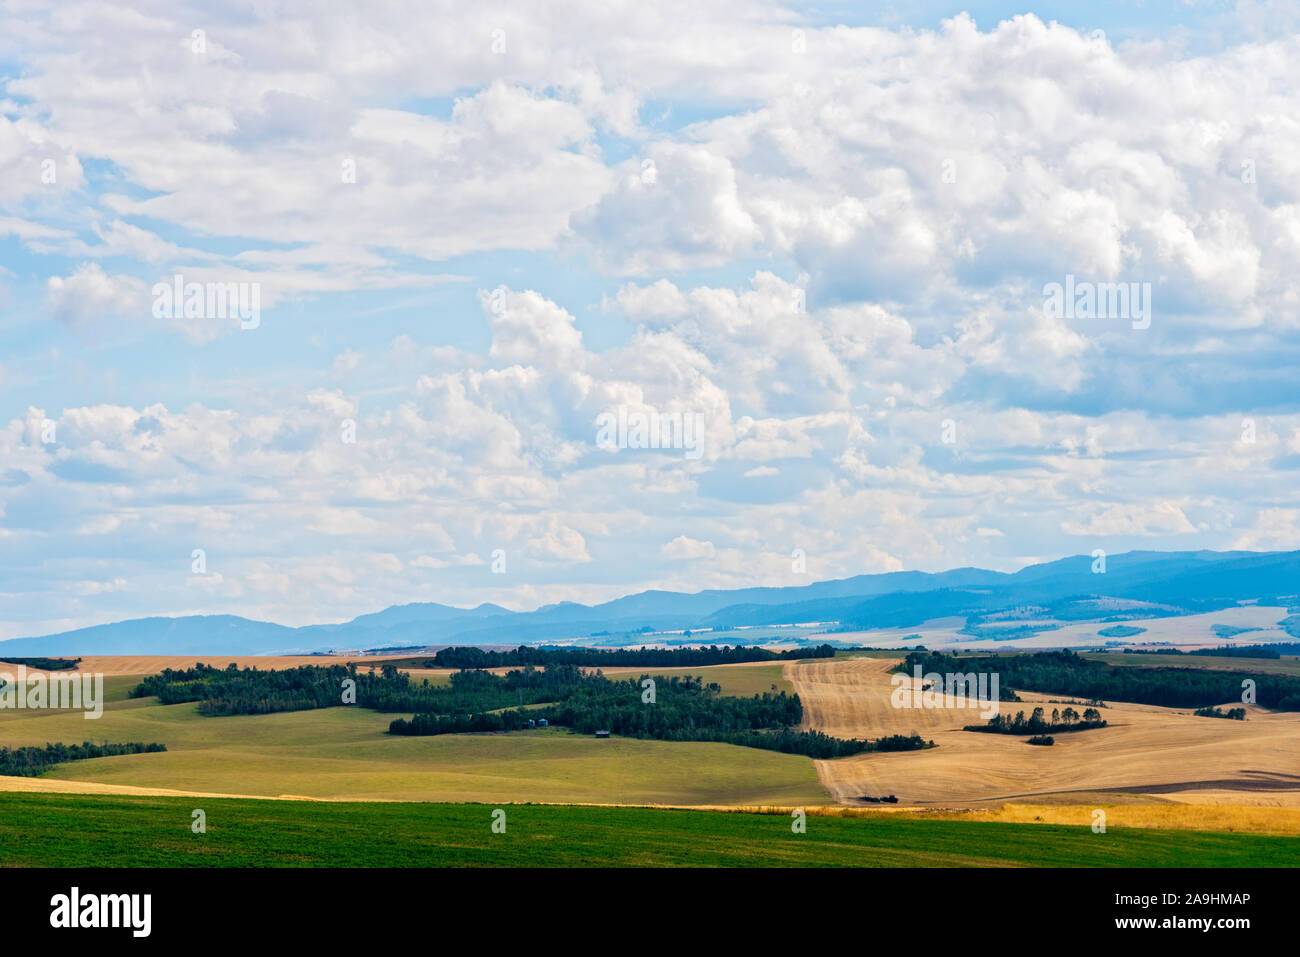 Gold and green fields of farmland with hazy mountains beyond under blue skies with white fluffy clouds. Stock Photo